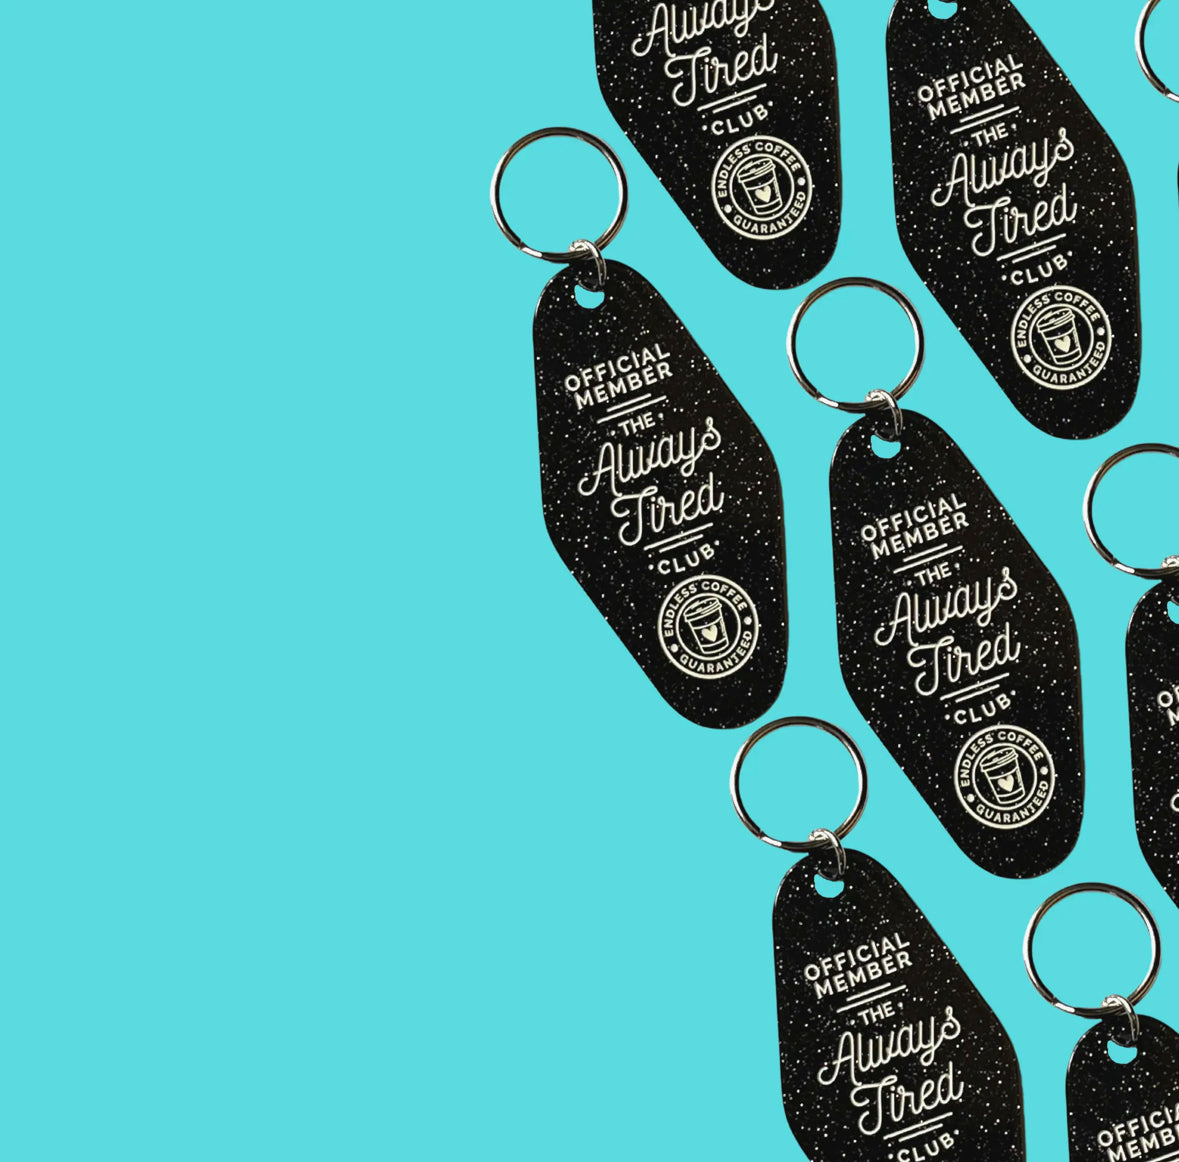 Assorted Motel Keychains - Made in Guelph, ON